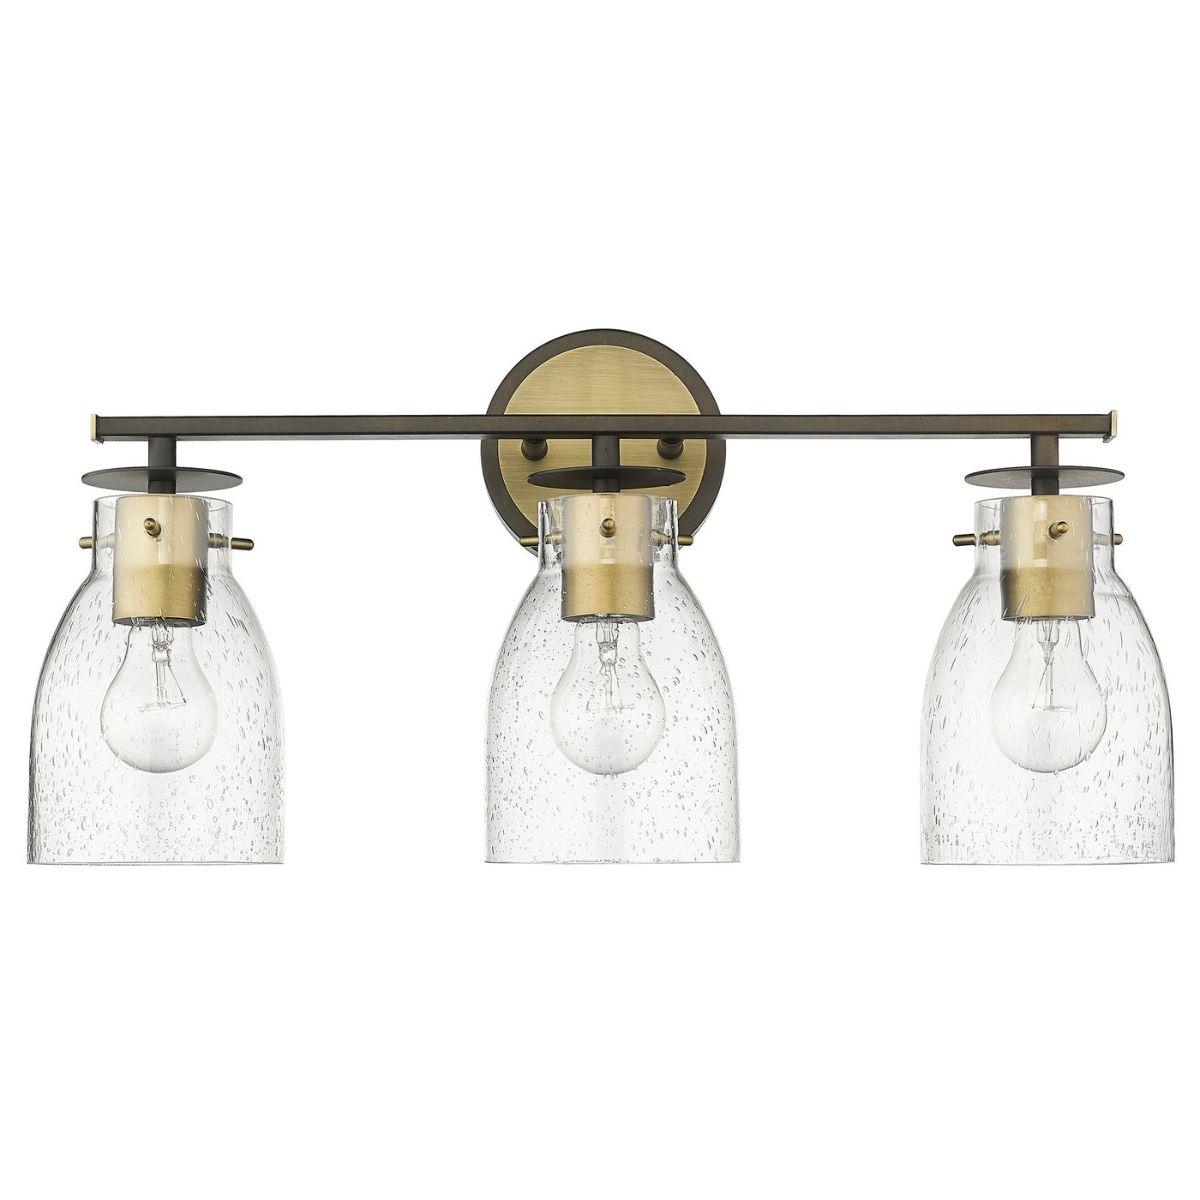 Shelby 23 in. 3 Lights Vanity Light Oil Rubbed Bronze & Antique Brass Finish